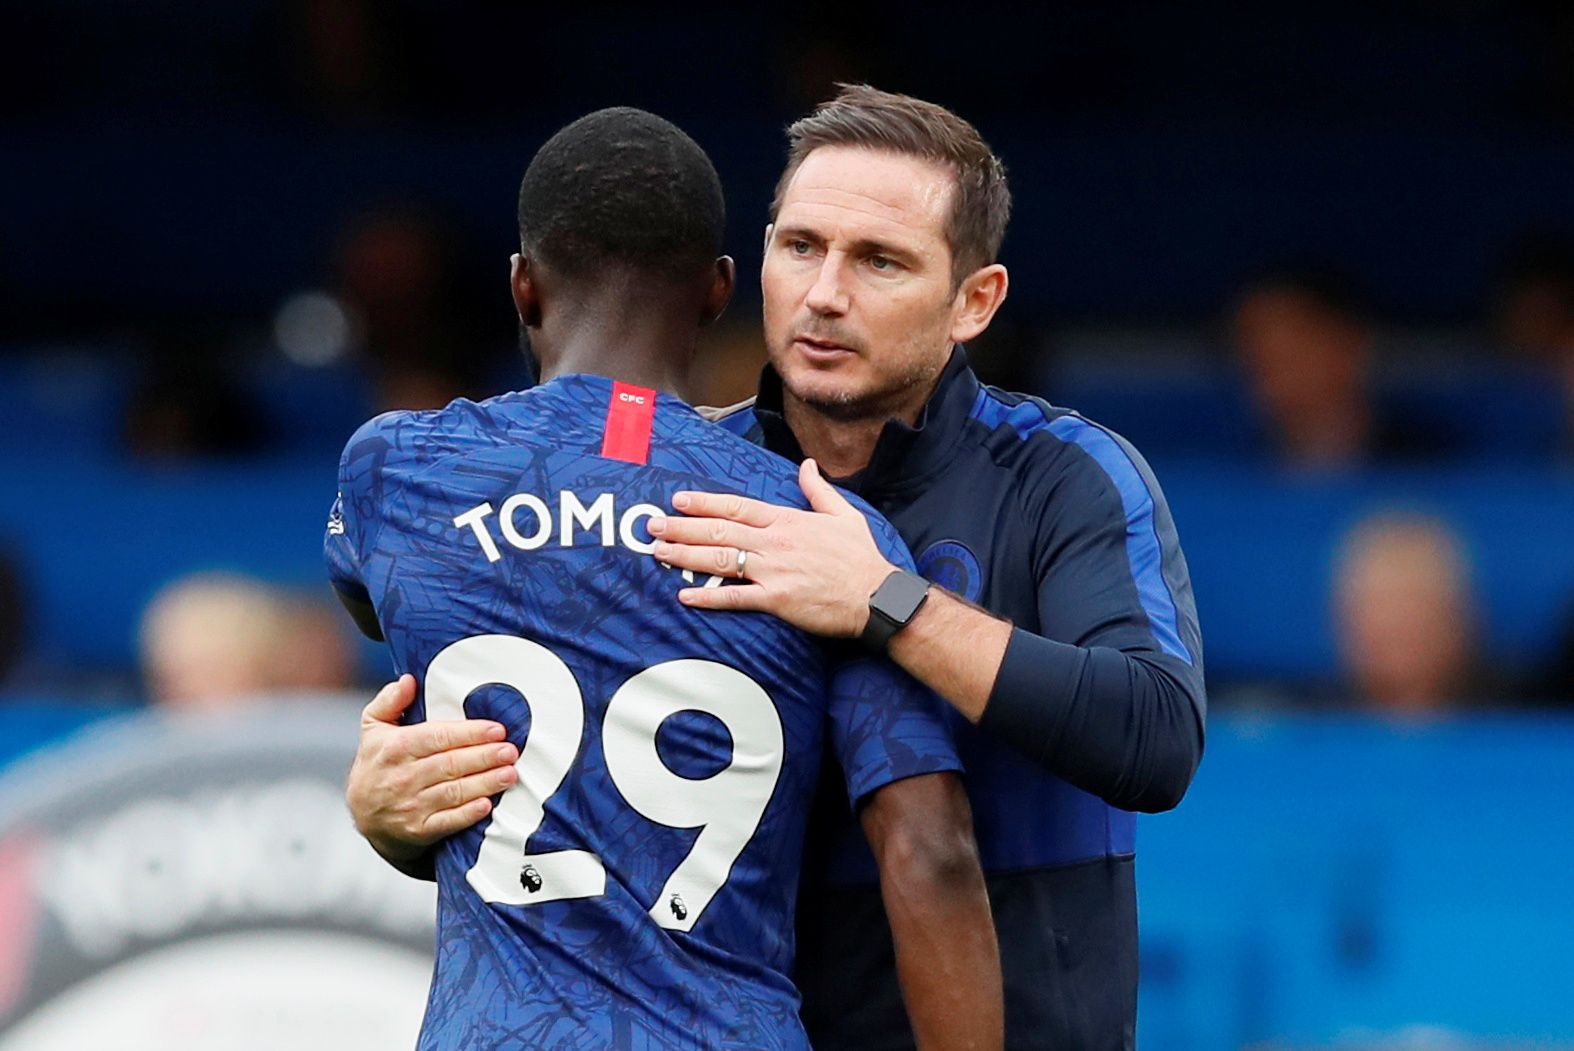 Soccer Football - Premier League - Chelsea v Brighton &amp; Hove Albion - Stamford Bridge, London, Britain - September 28, 2019  Chelsea's Fikayo Tomori celebrates with manager Frank Lampard after the match  REUTERS/David Klein  EDITORIAL USE ONLY. No use with unauthorized audio, video, data, fixture lists, club/league logos or 